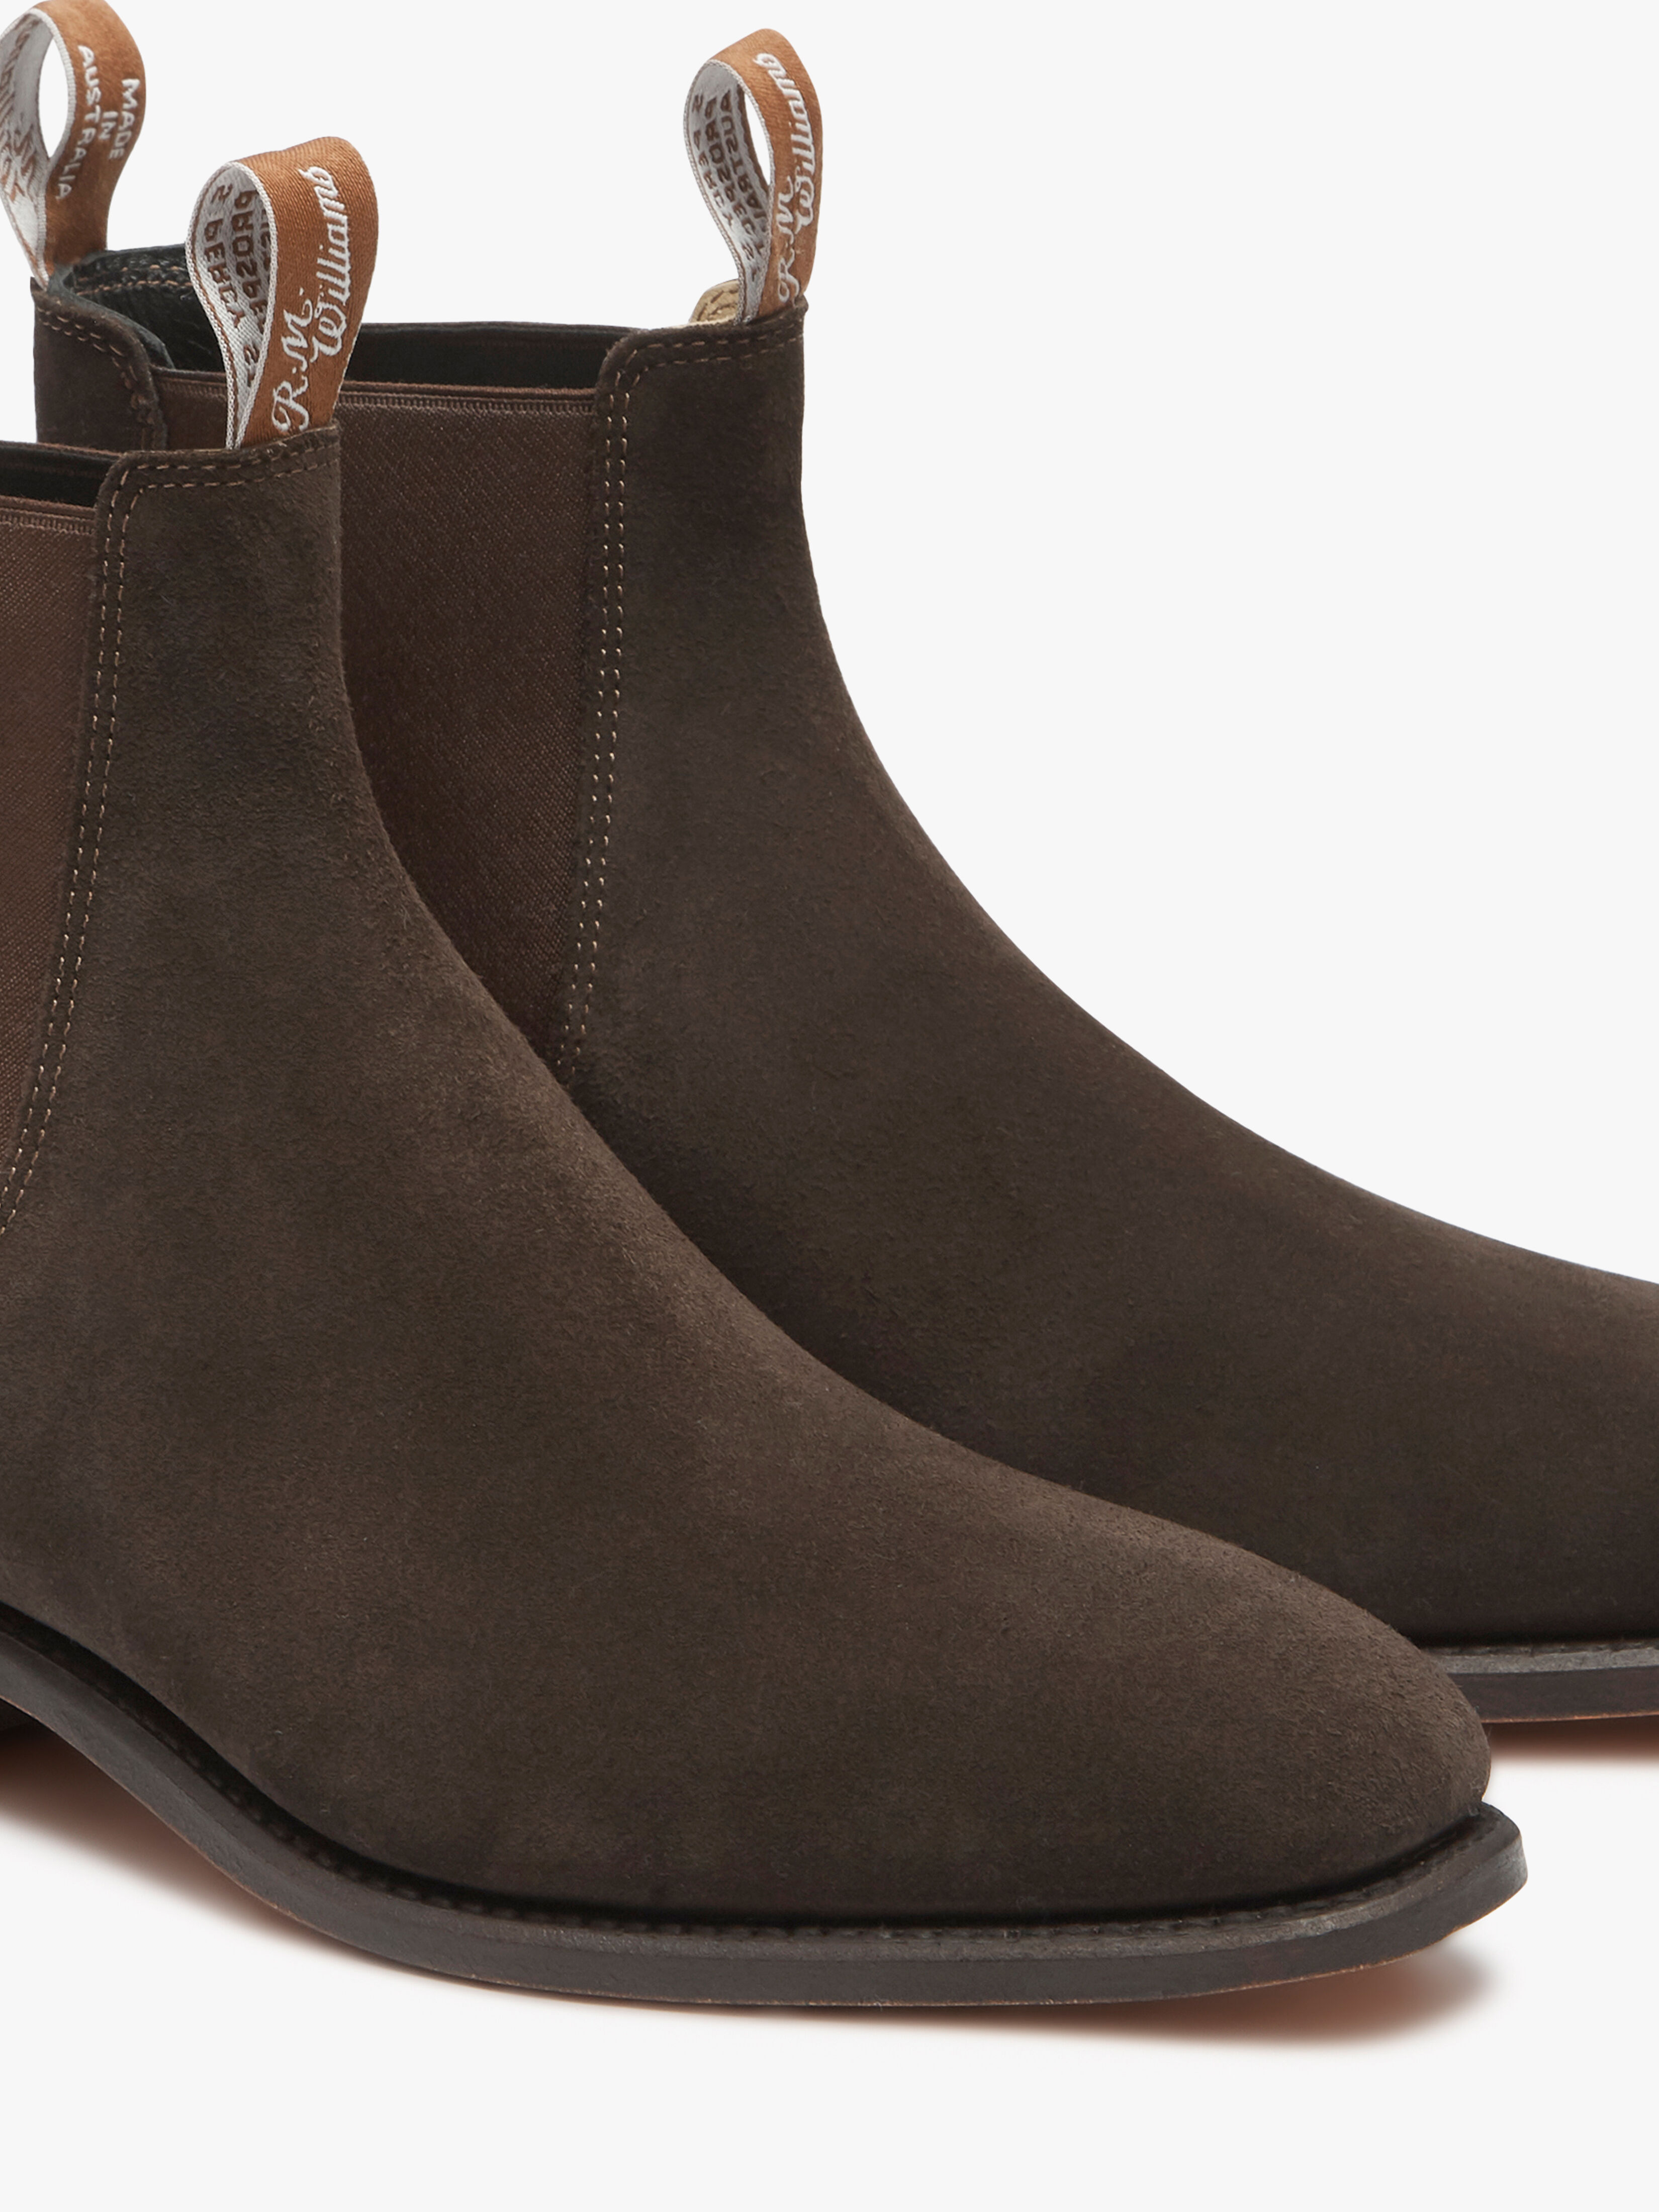 rm williams mens suede boots